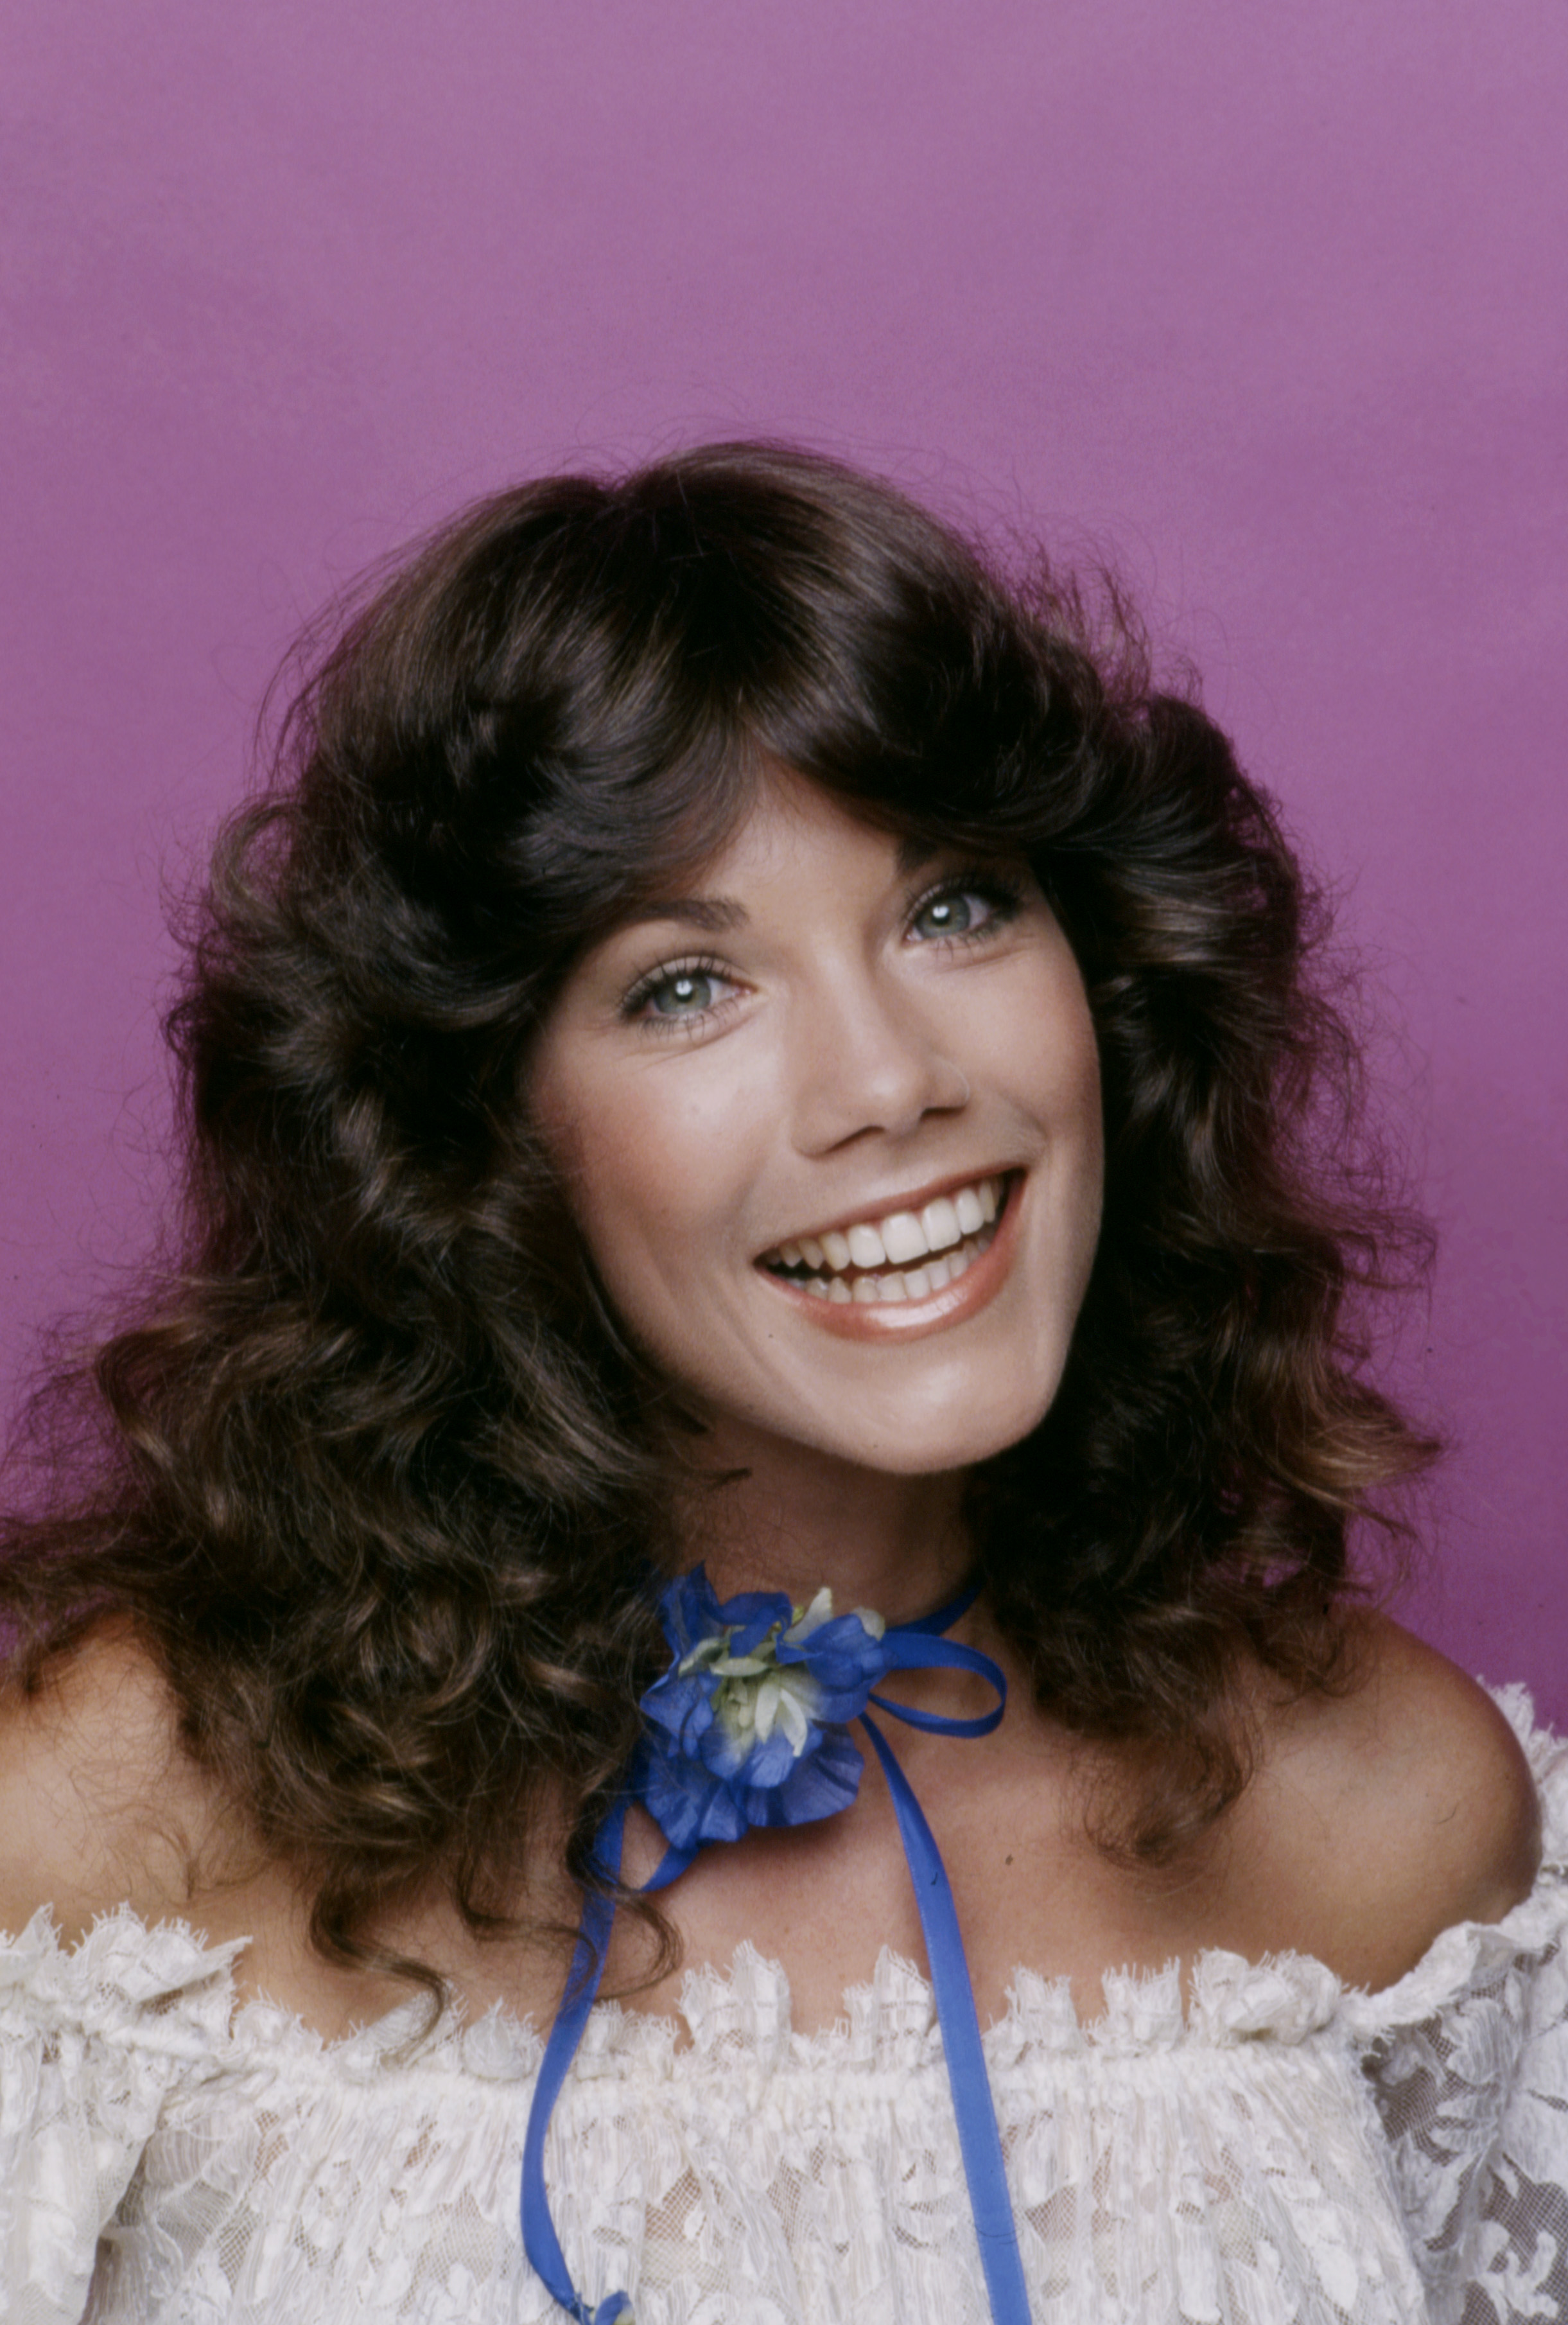 Barbi Benton on "Sugar Time" in 1977 | Source: Getty Images